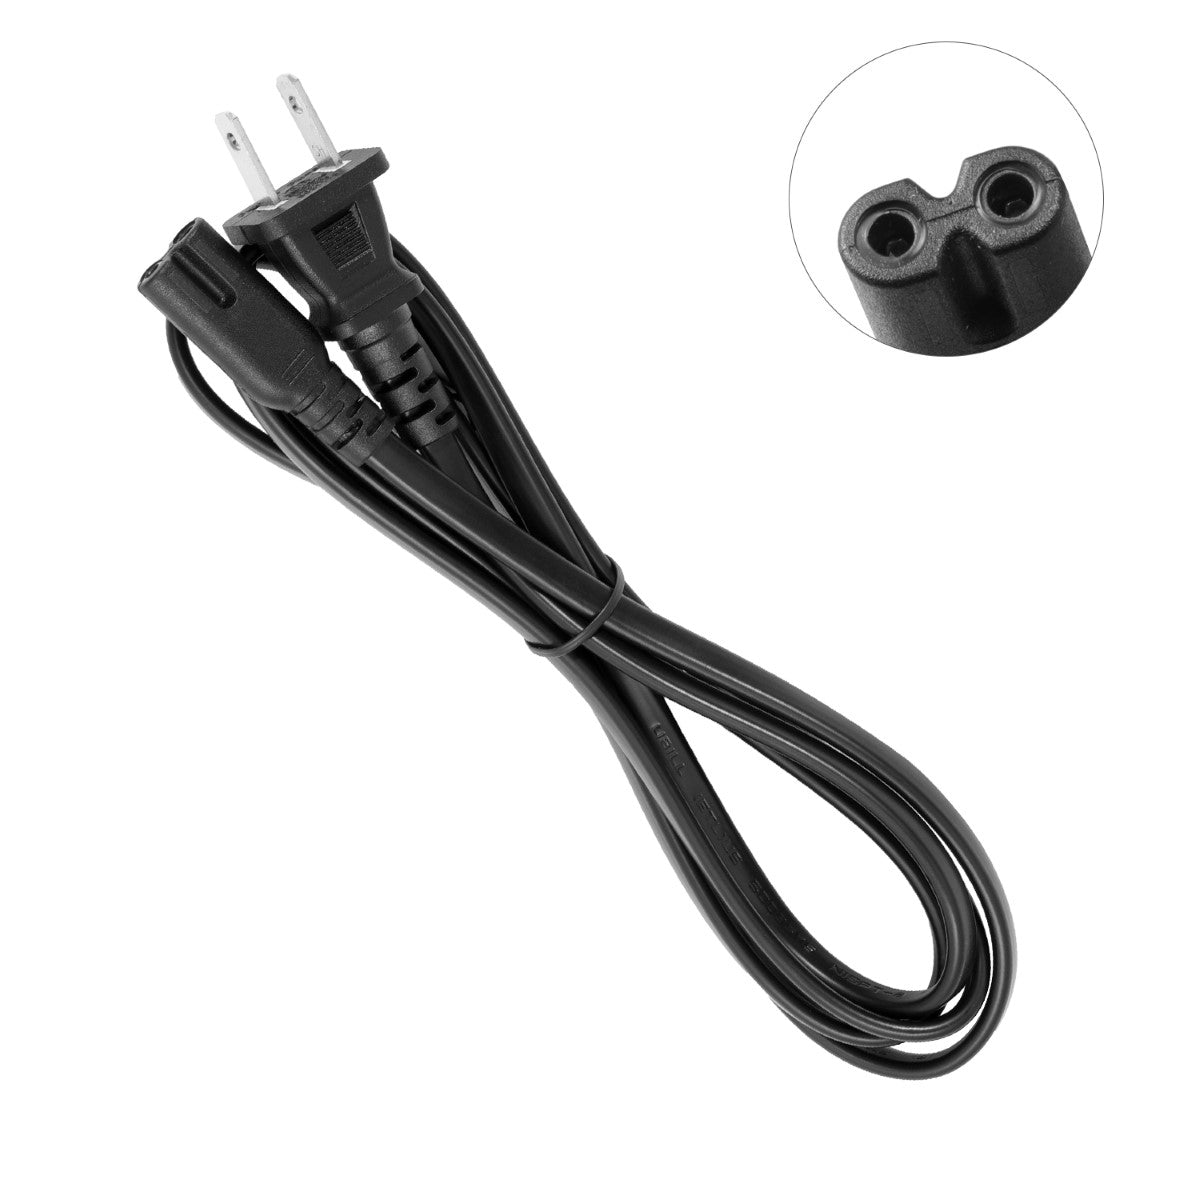 Power Cable for HP ENVY 5070 Printer.